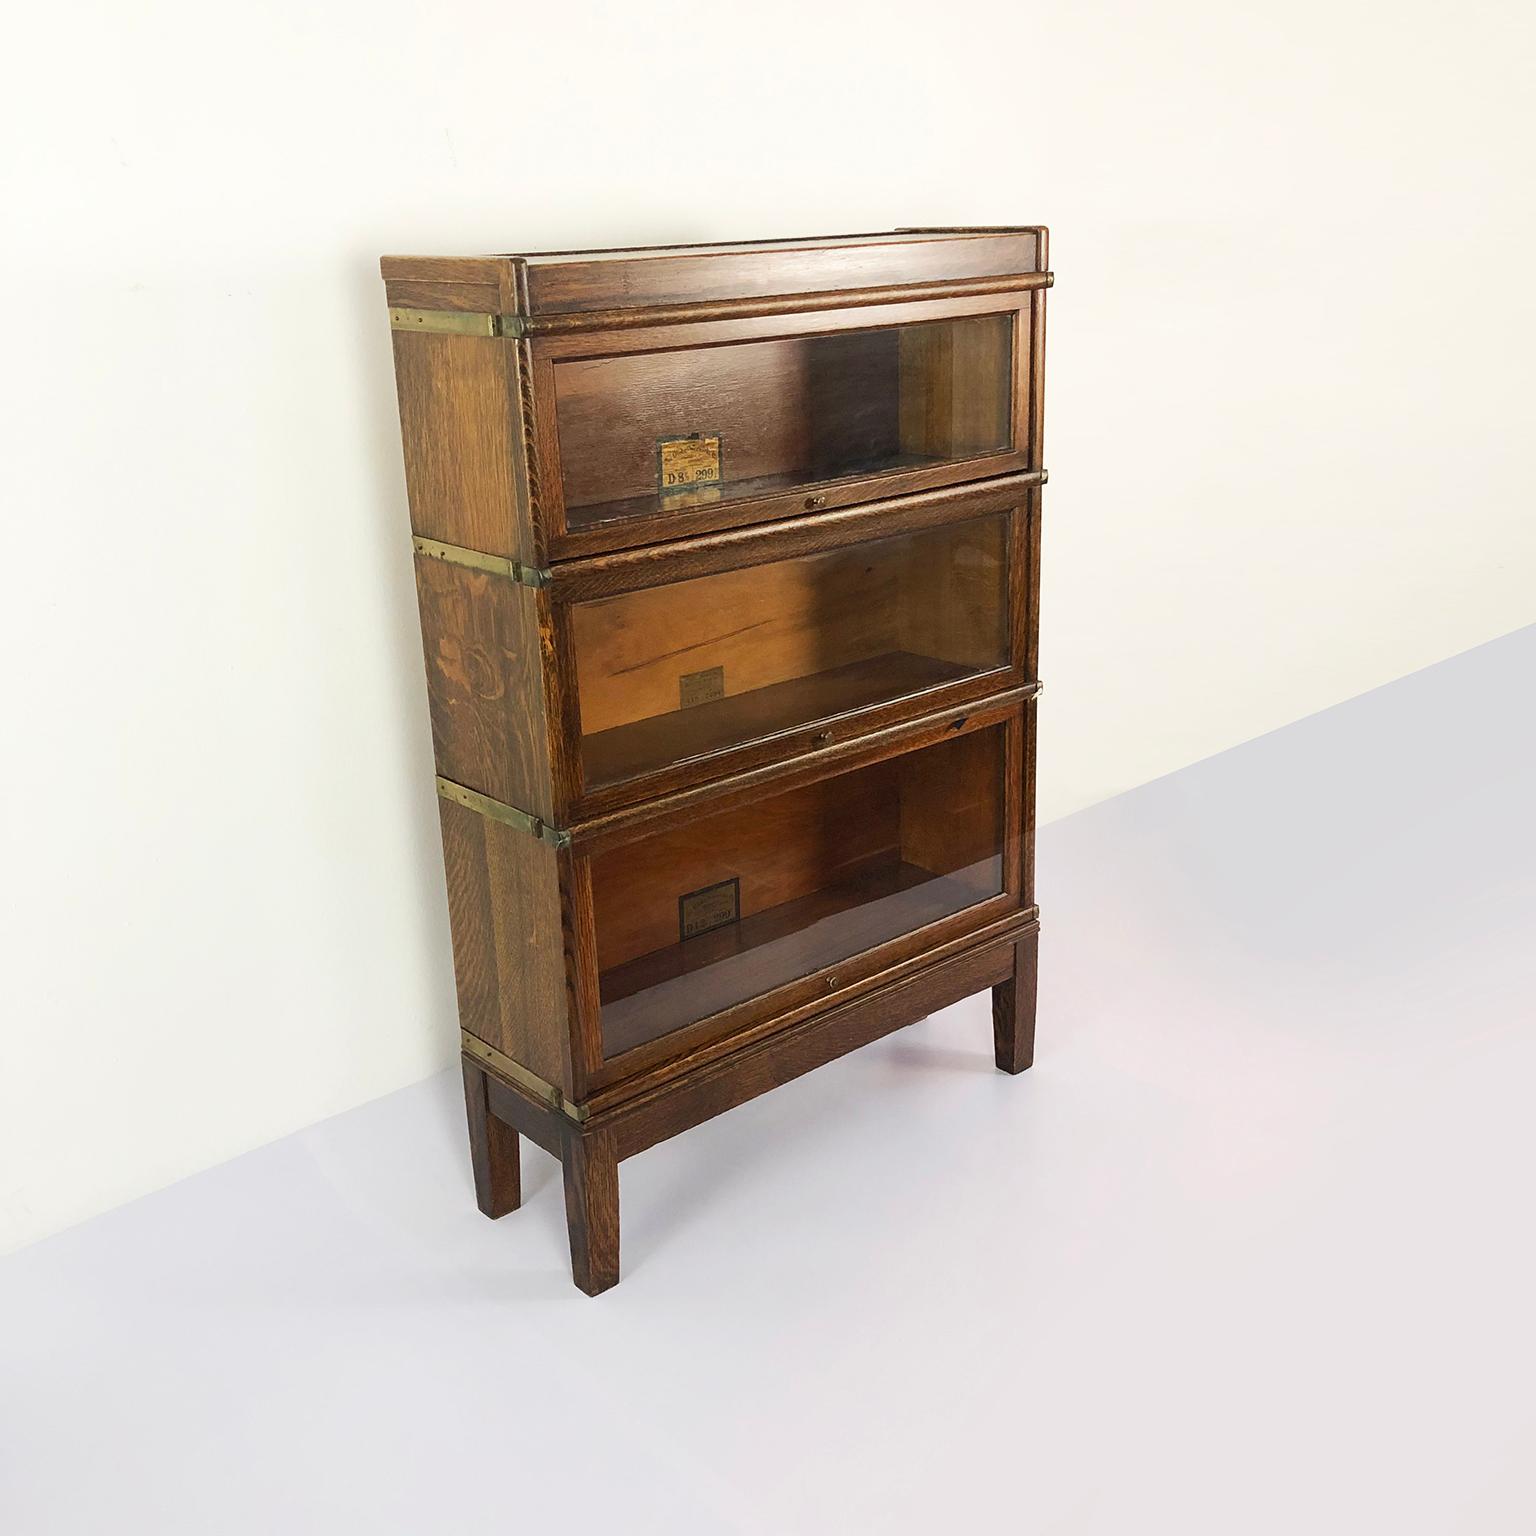 We offer this stunning antique Globe-Wernicke 3-stack barrister bookcase in triggered oak and metal band supports, the bookcase recently restored, circa 1900.


The Globe-Wernicke was formed as a result of the Cincinnati based Globe Files Company